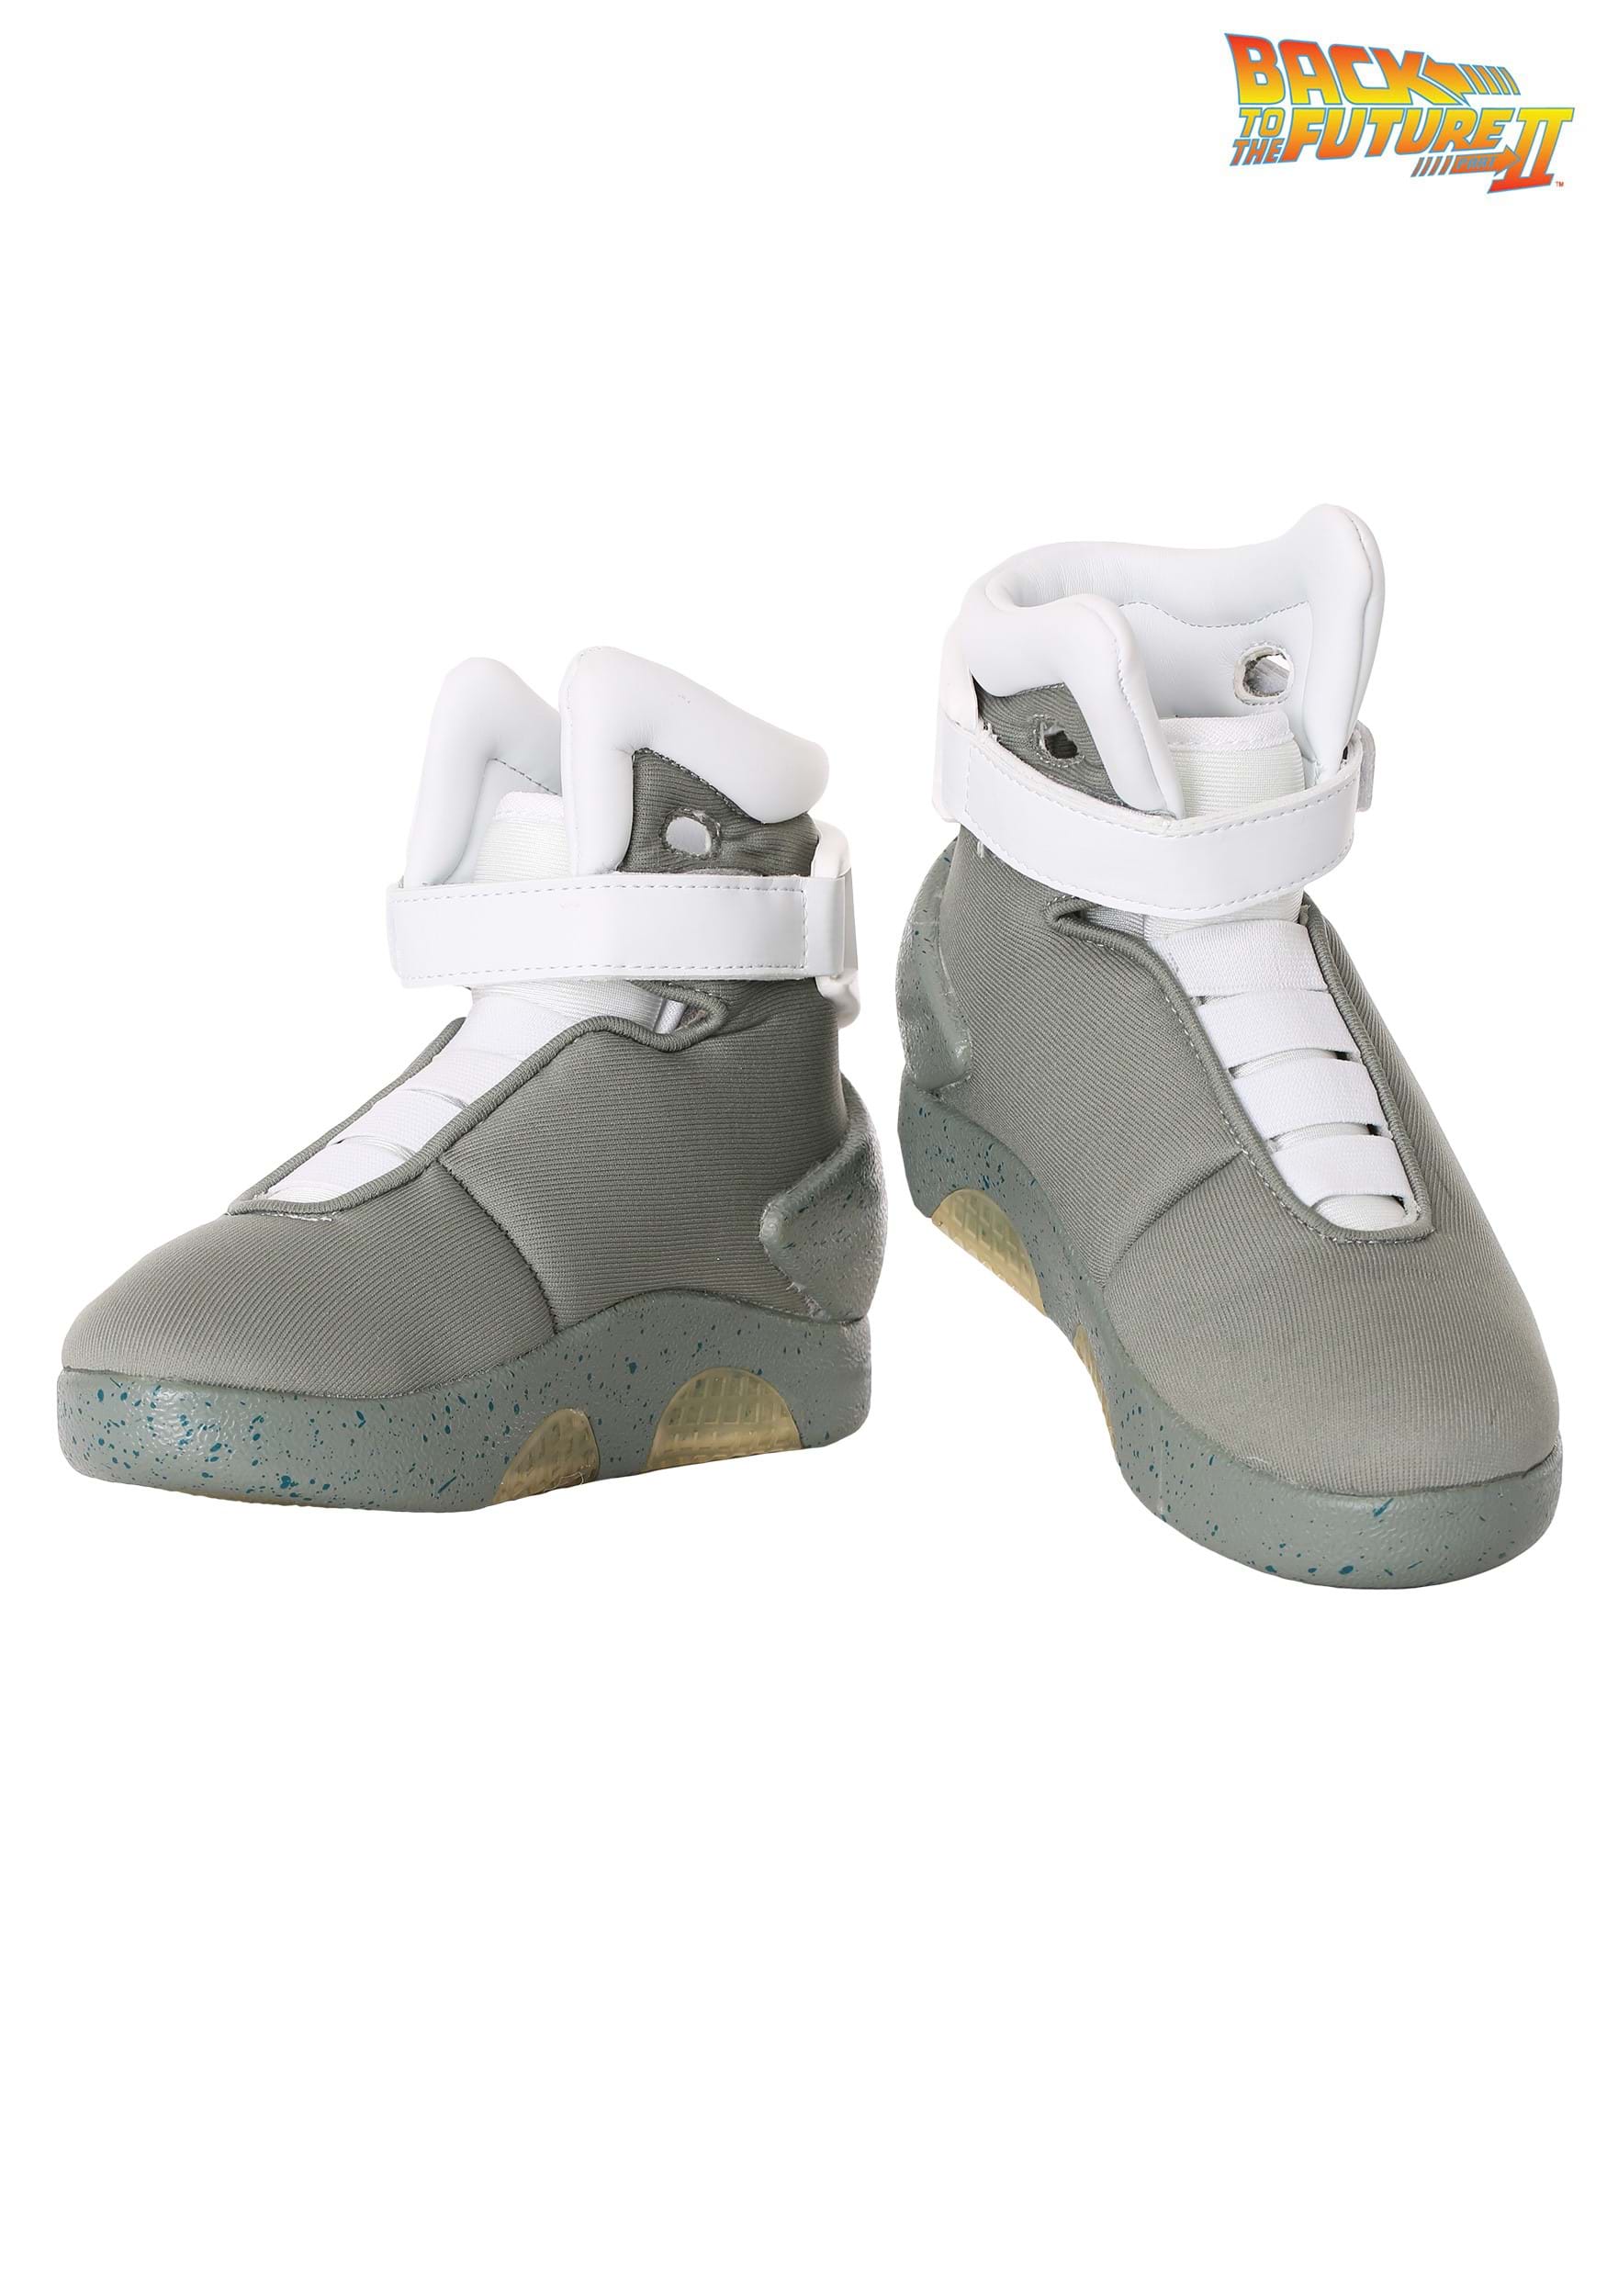 Light Up Back To The Future Kid's Shoes